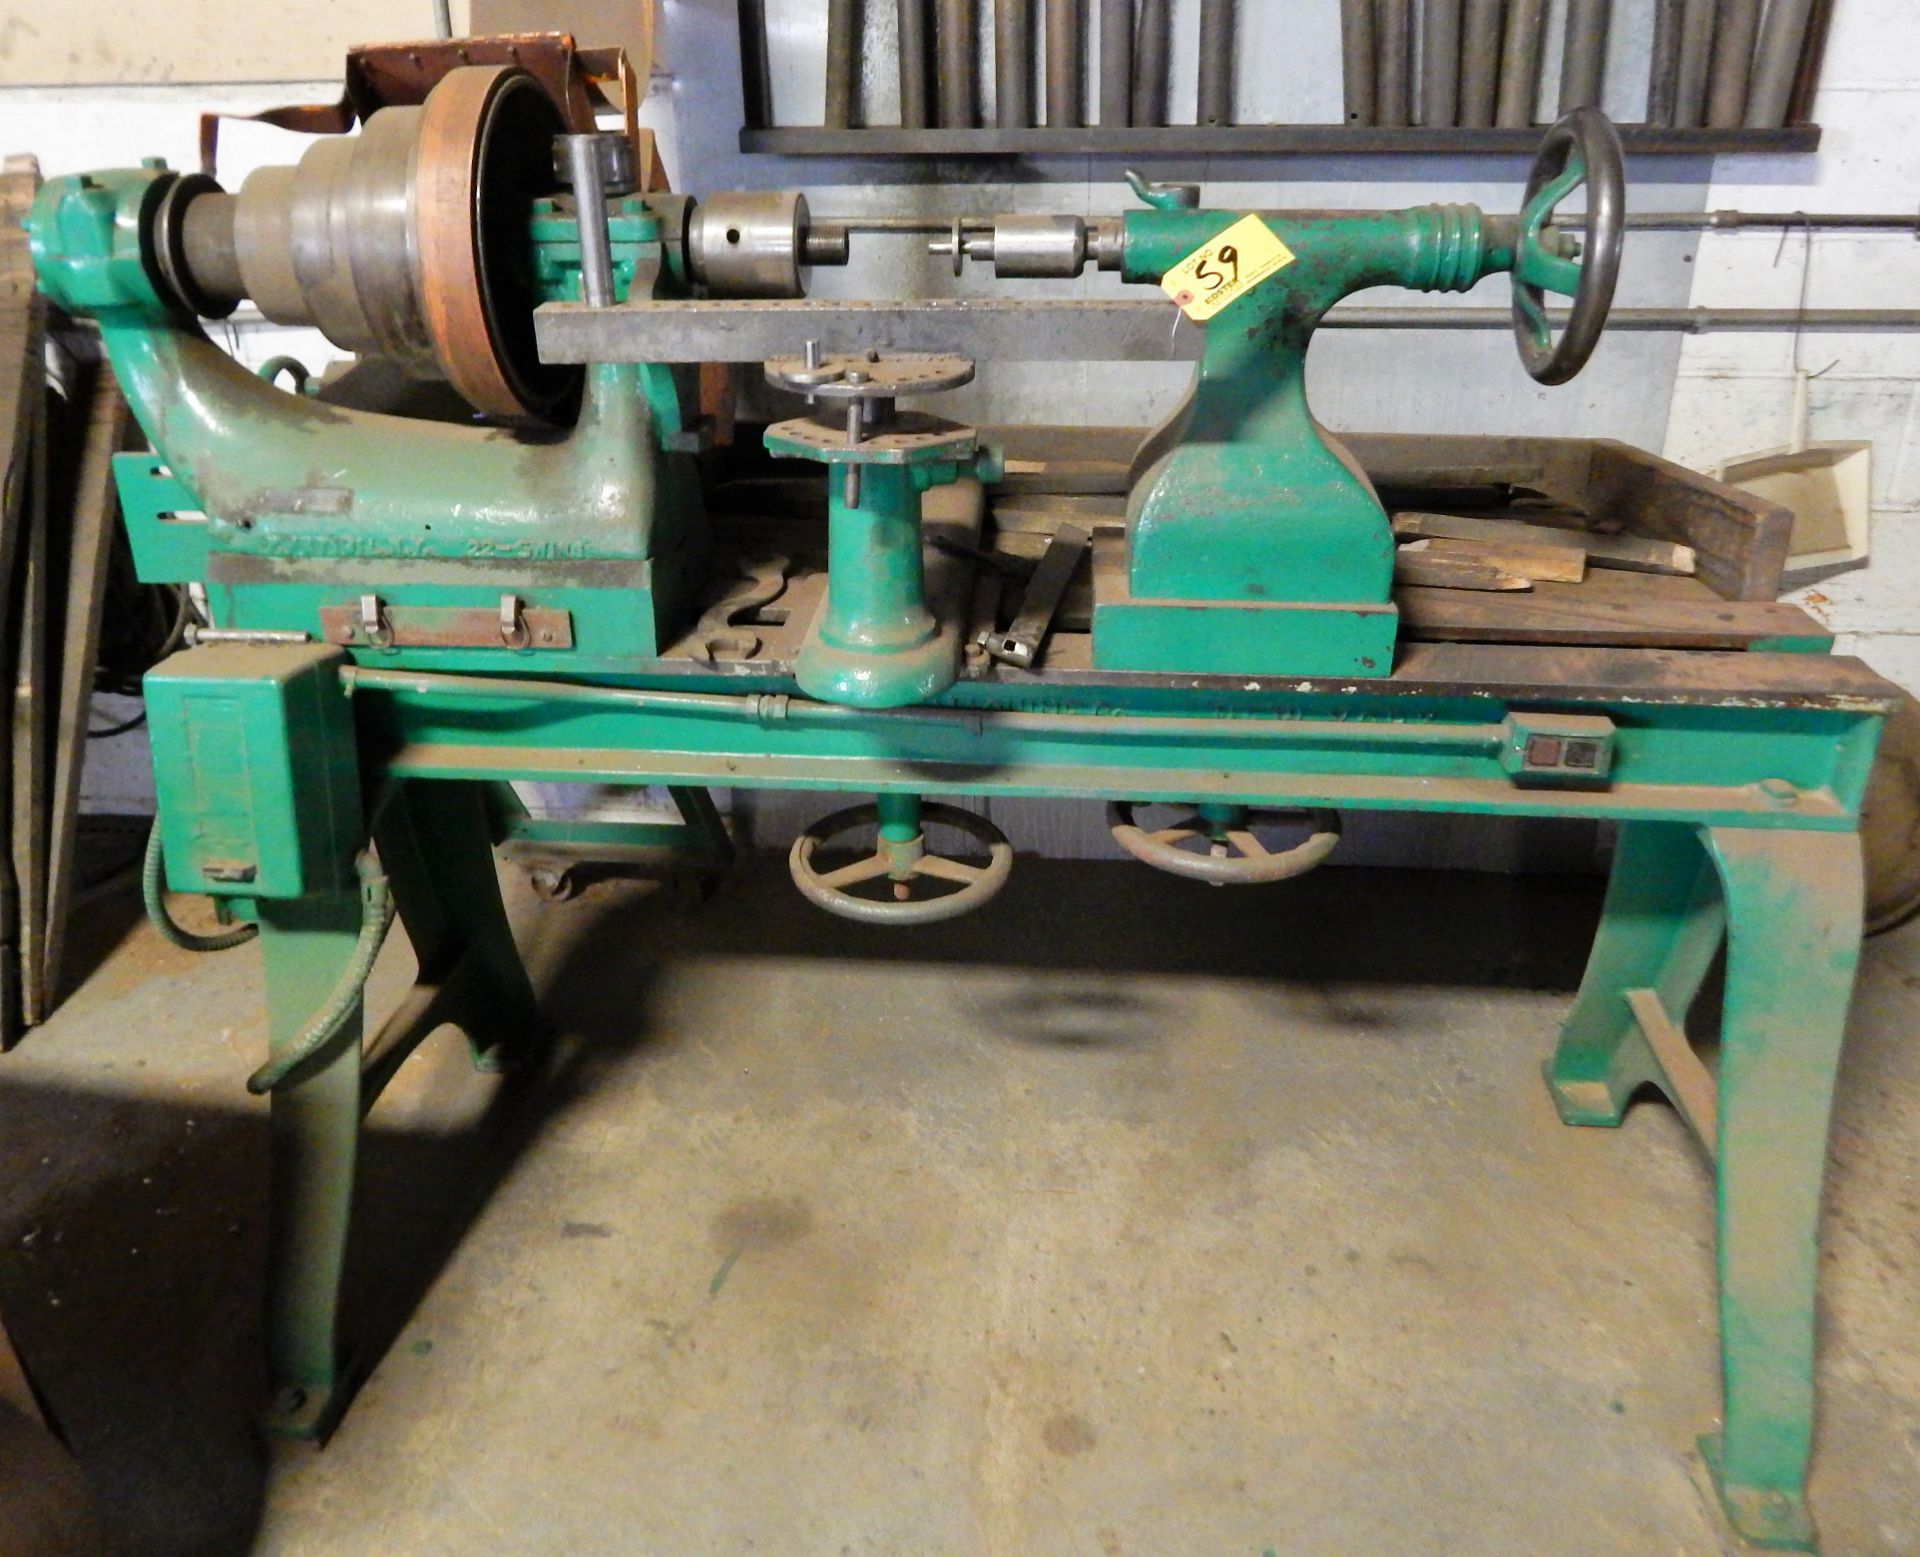 PRIBIL 30" X 27" SPINNING LATHE WITH REST TAILSTOCK, BELT PULLEY